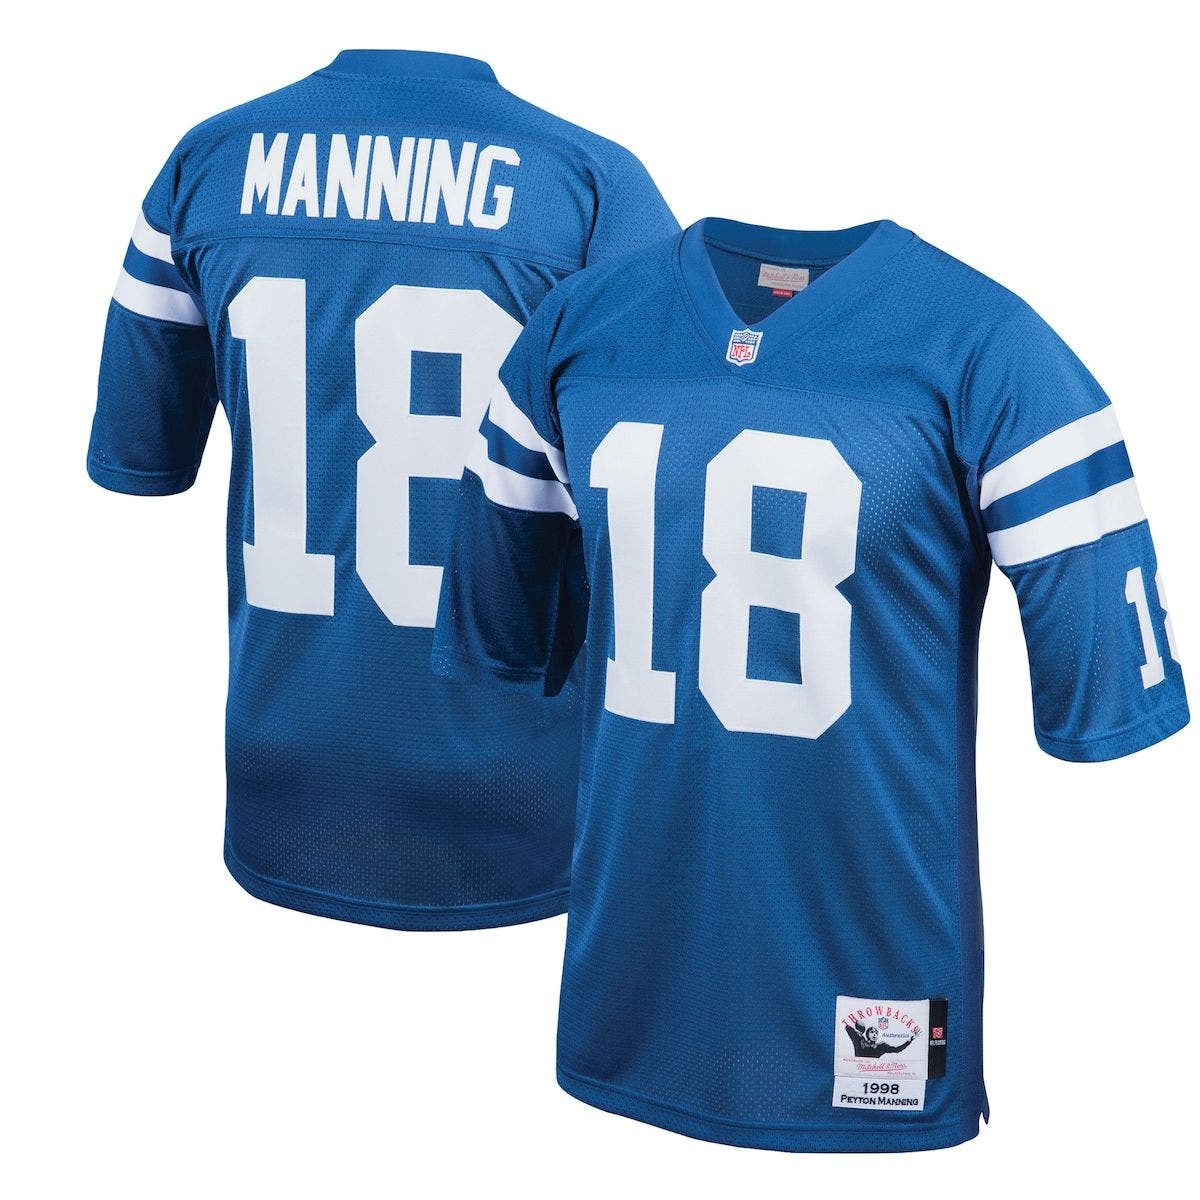 Mens Peyton Manning Royal Indianapolis Colts Legacy Replica Jersey at Nordstrom Nordstrom Men Sport & Swimwear Sportswear Sports Tops 